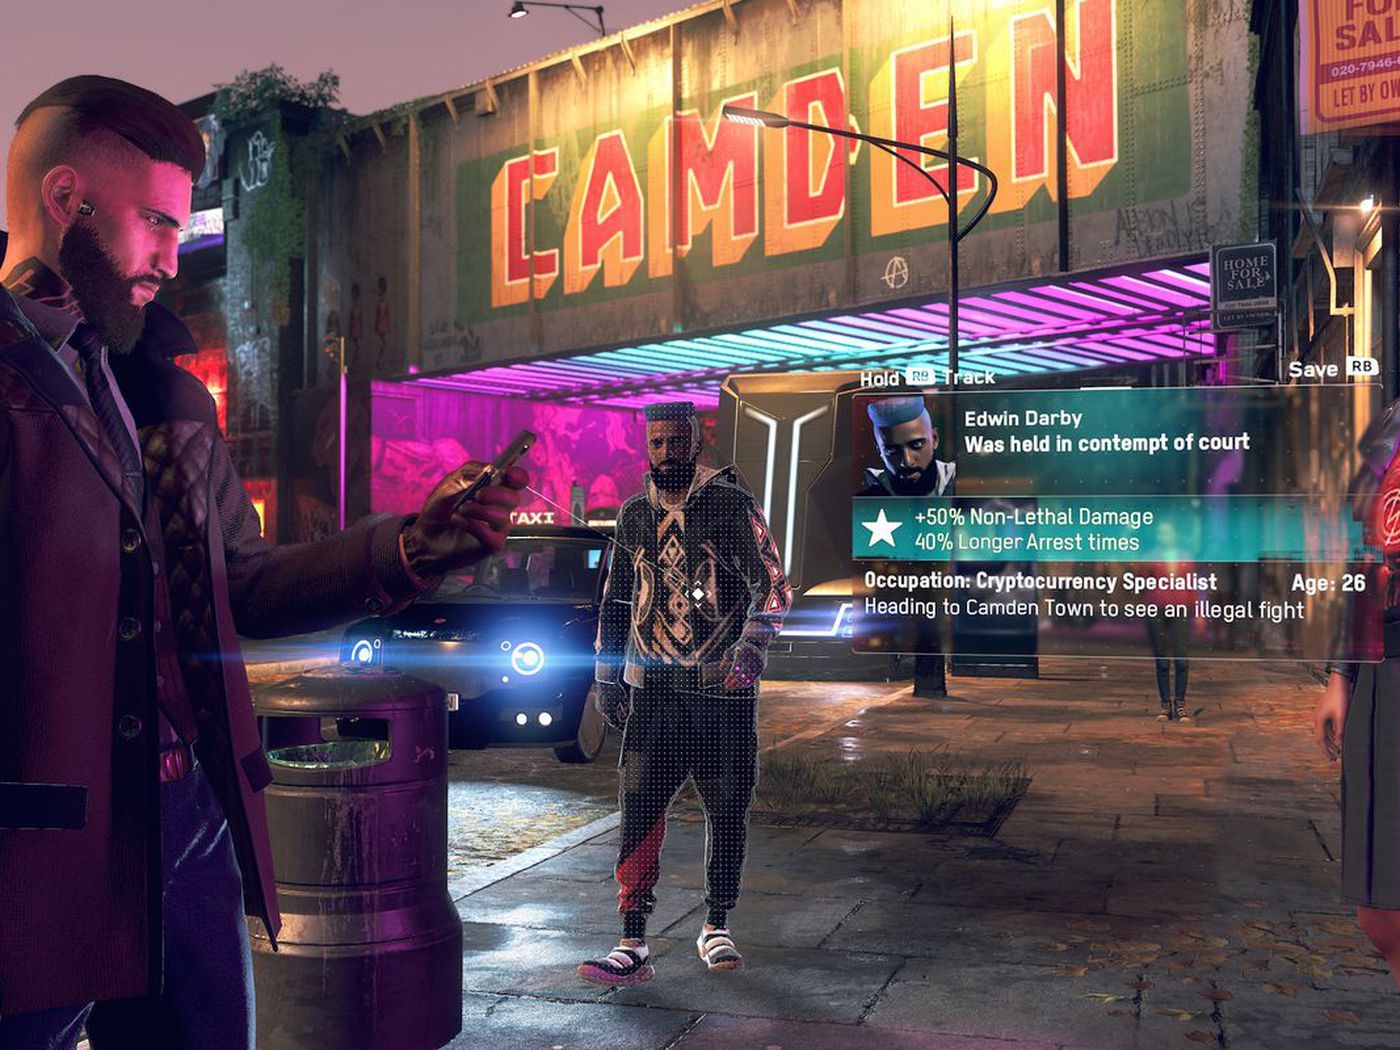 Watch Dogs: Legion Bloodline expansion release date announced at E3